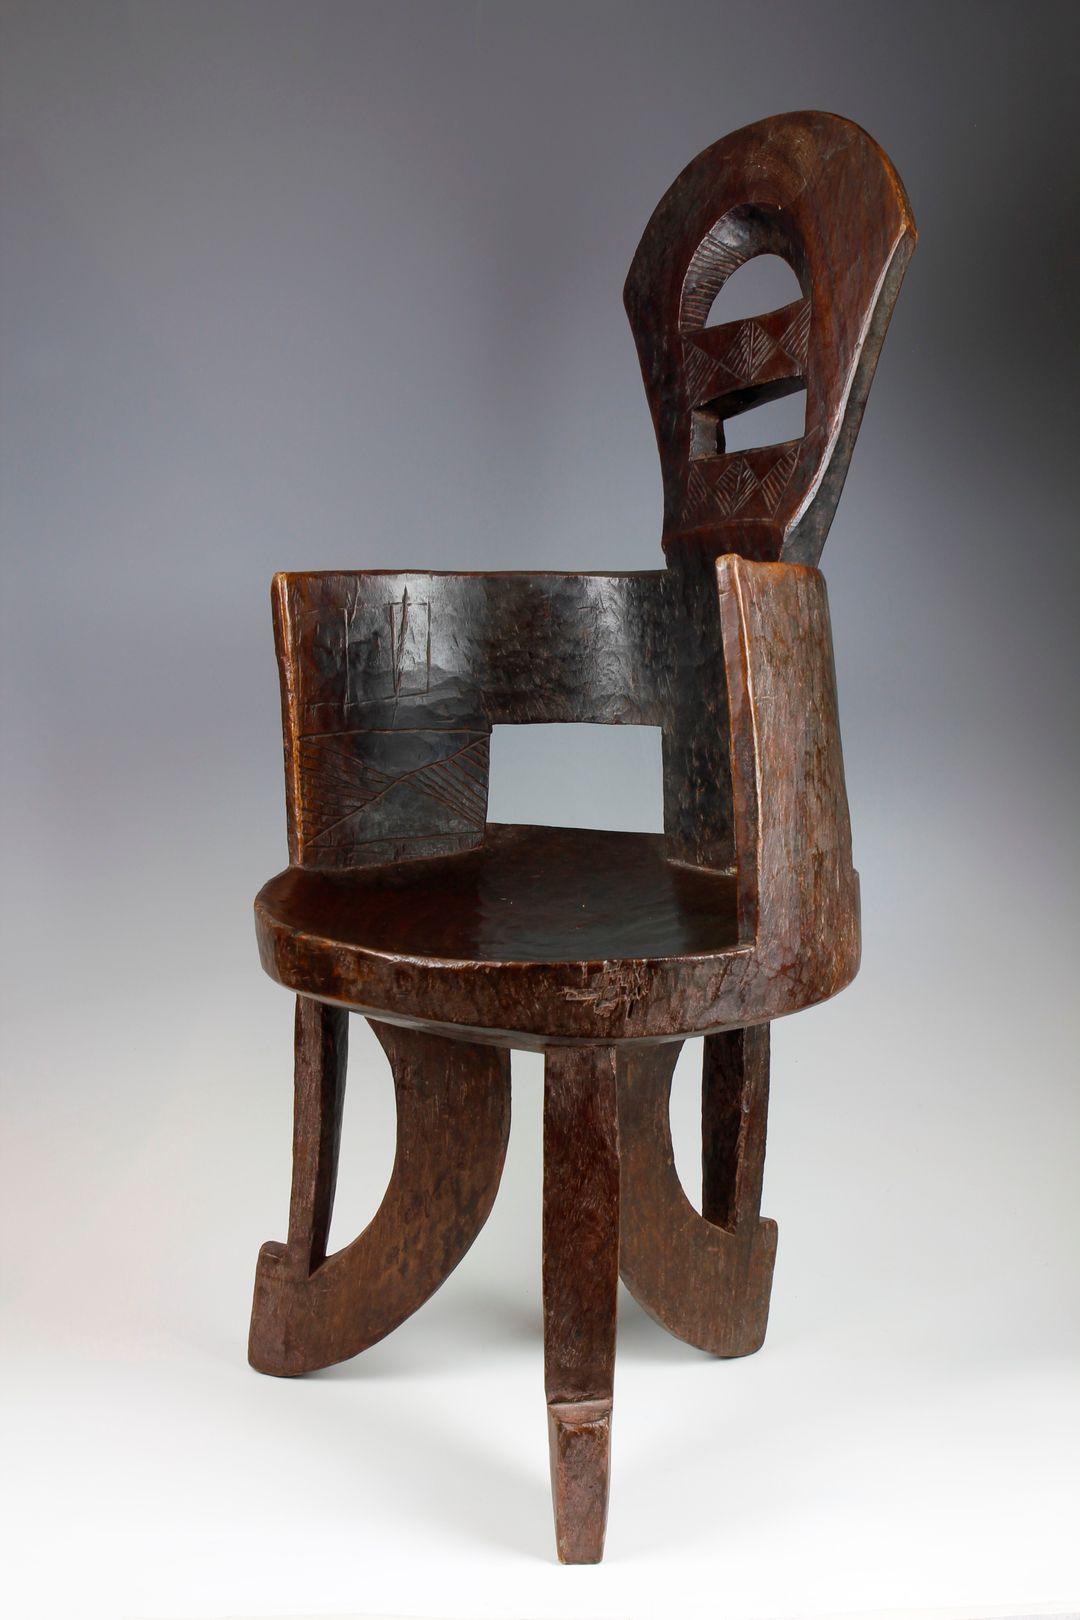 Tribal Slender 19th Century High-Backed Ethiopian Chair For Sale